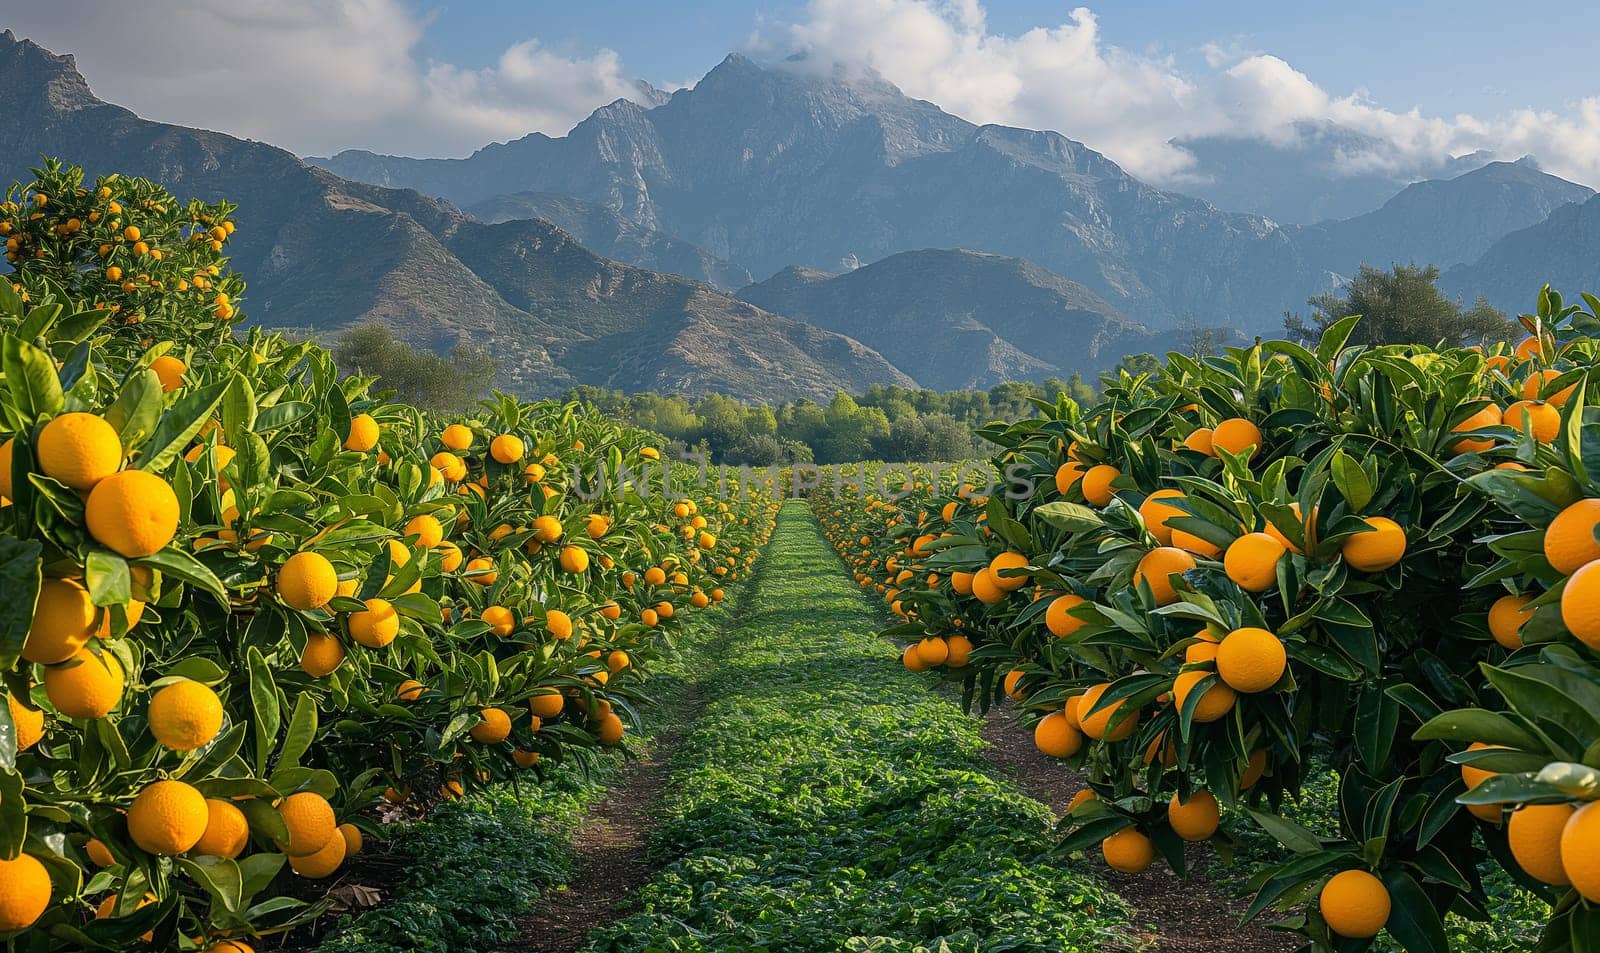 Field of oranges with mountains in the backdrop.